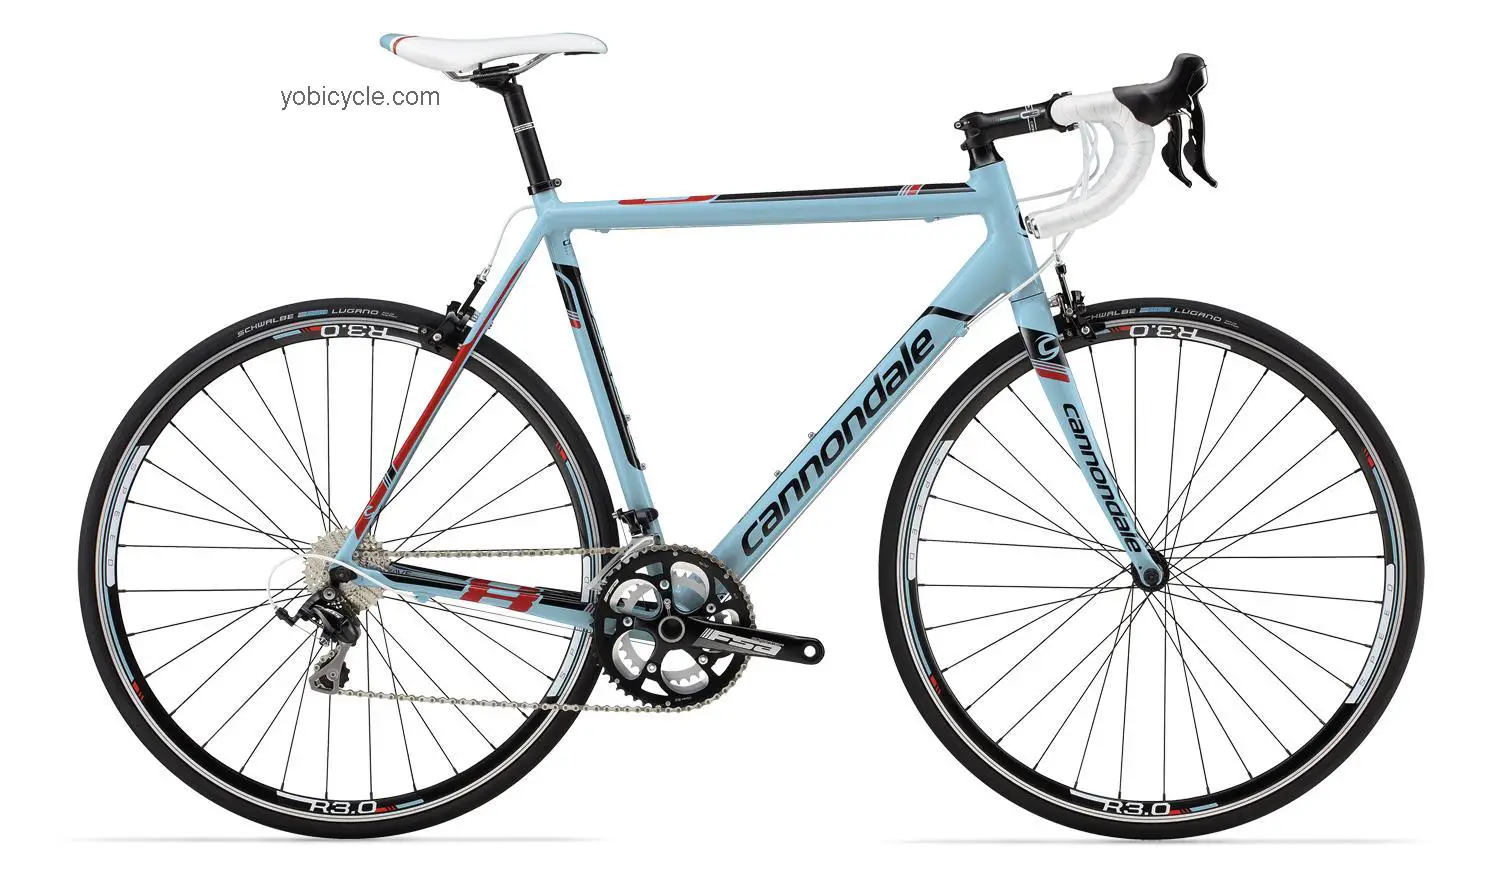 Cannondale CAAD8 5 105 Compact 2014 comparison online with competitors